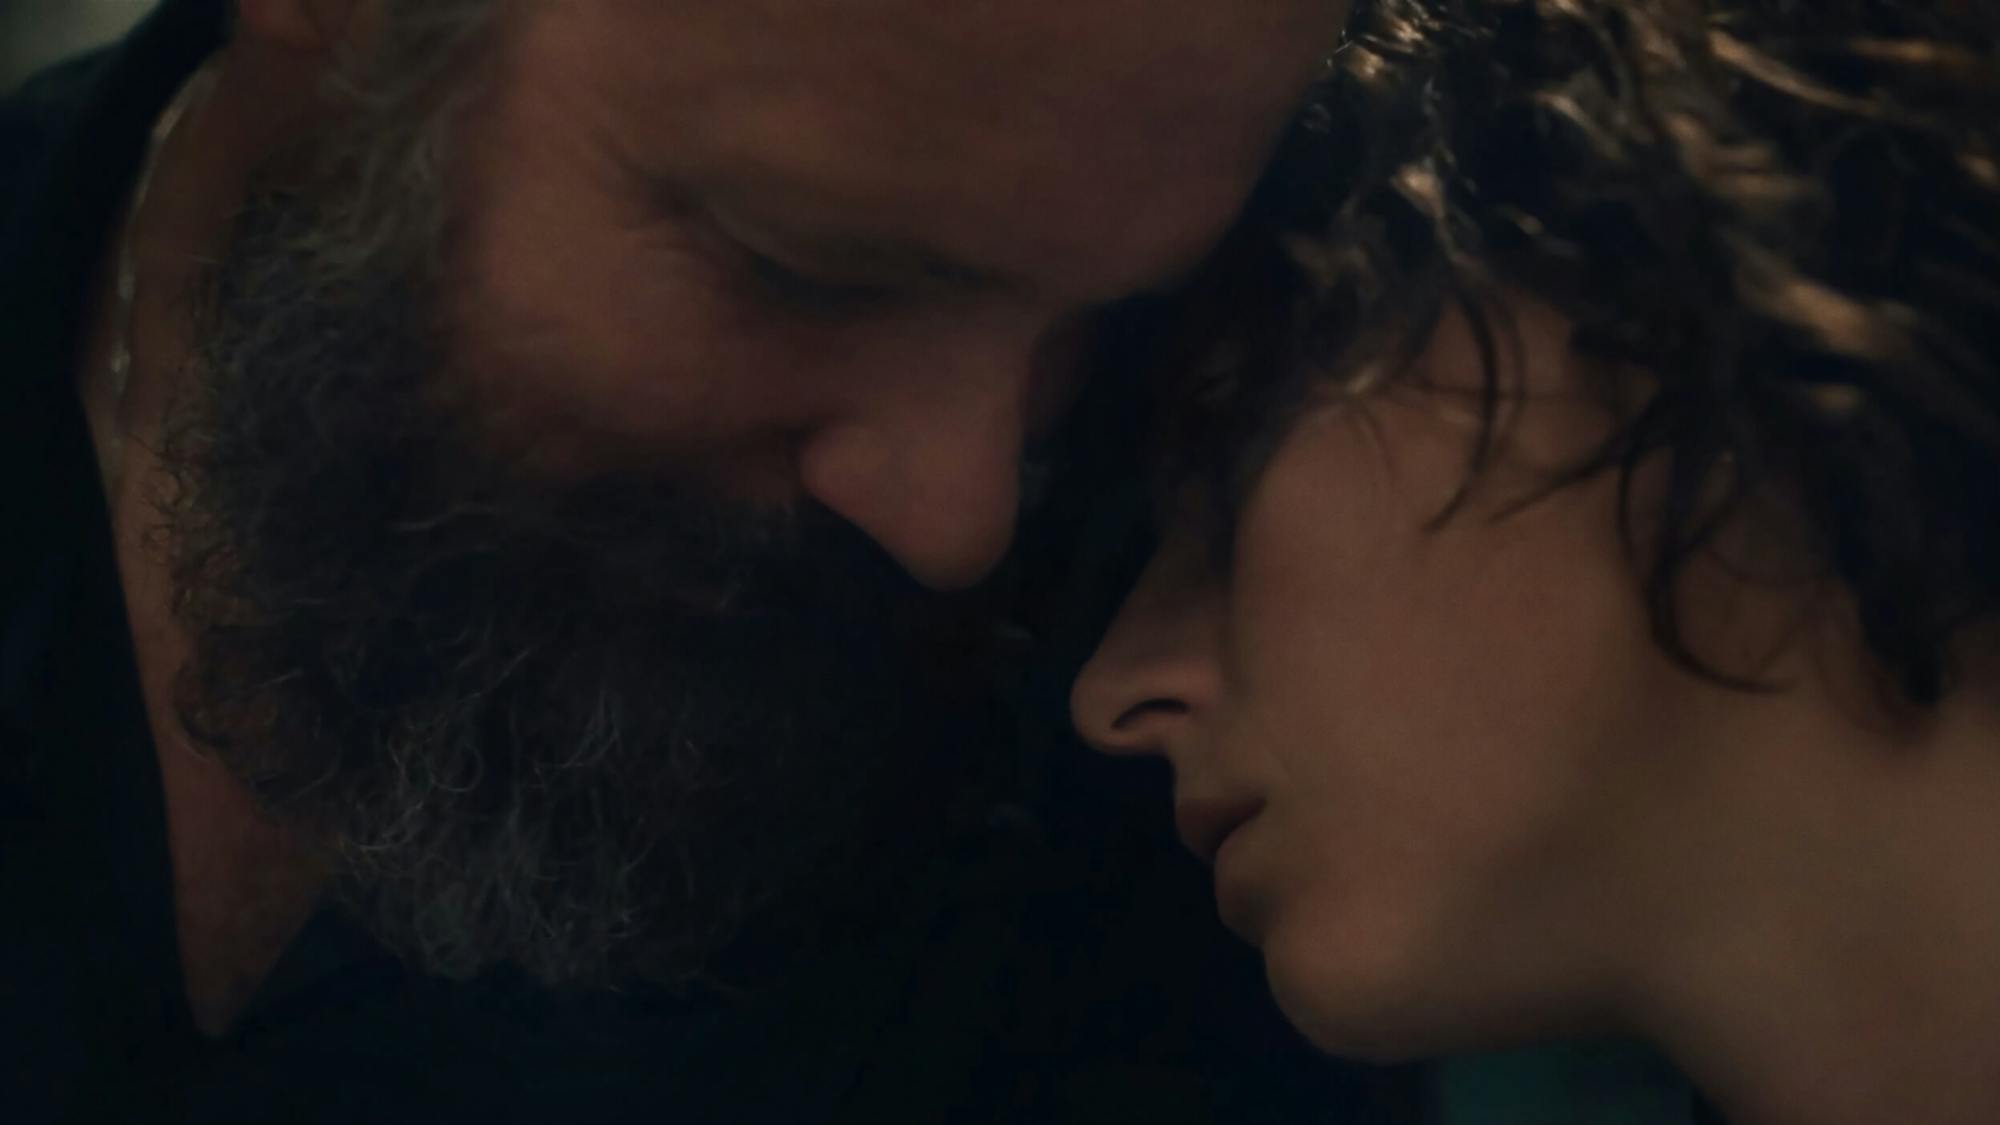 Professor Hardy (Peter Sarsgaard) and Yound Leda (Jessie Buckley) embrace in this close-up shot.